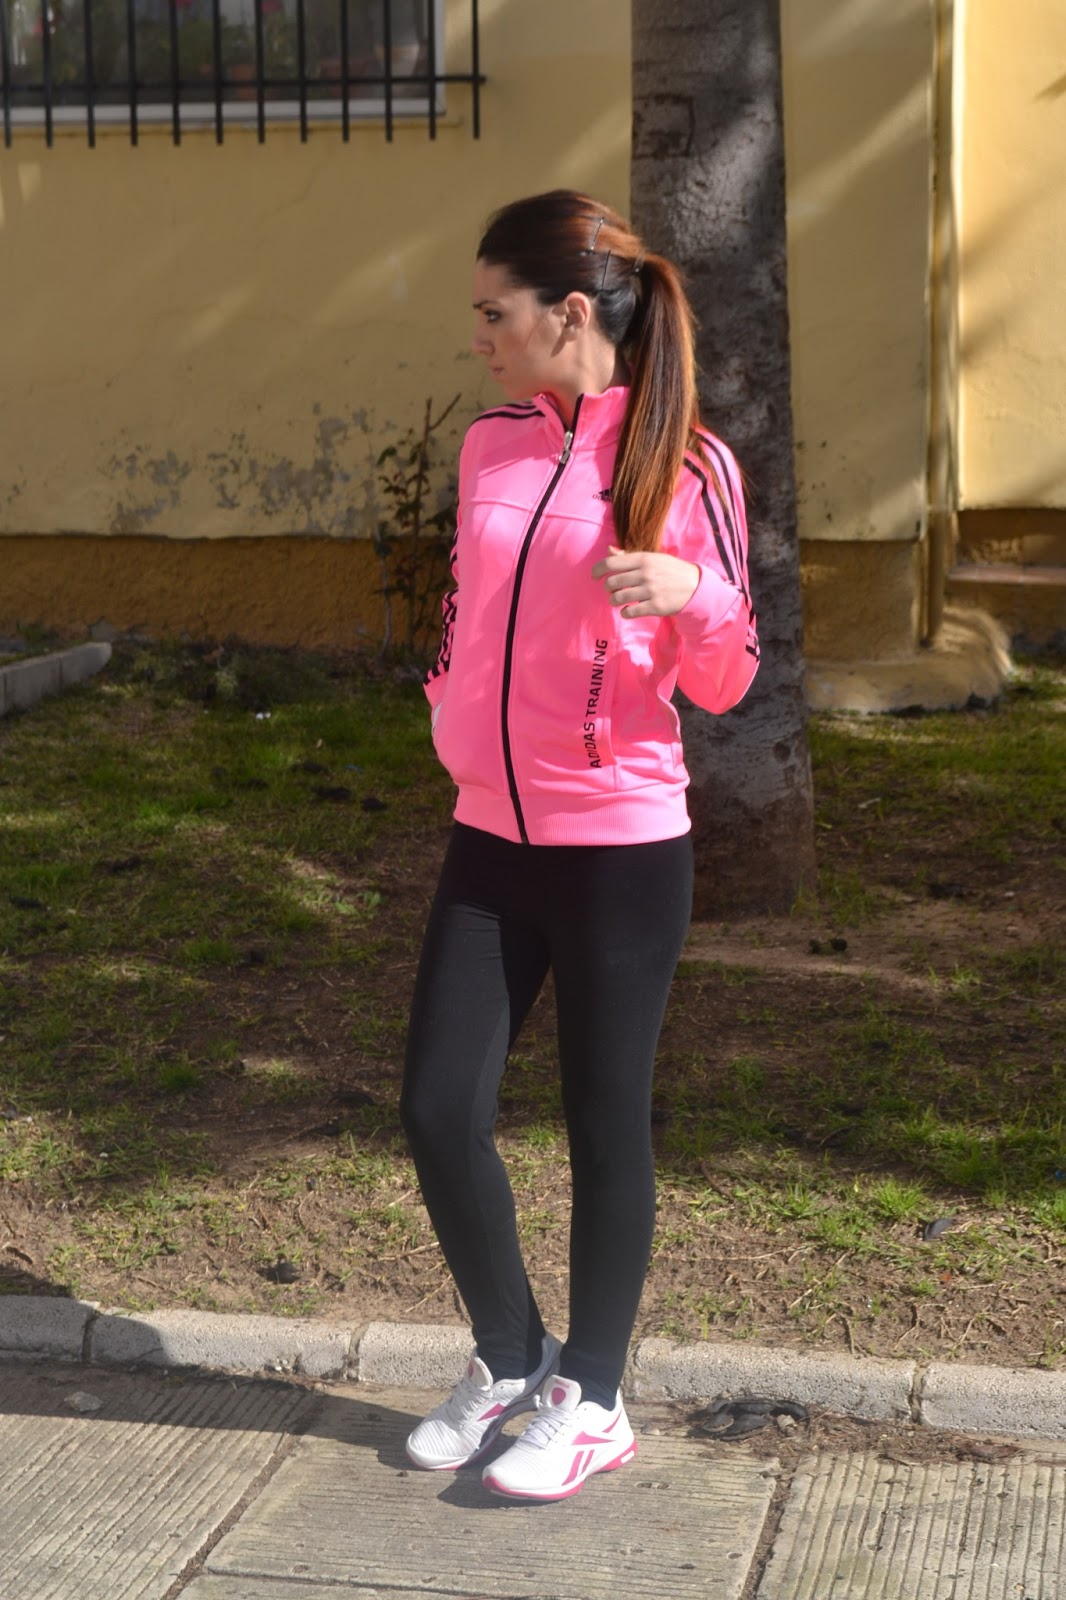 My Life in Pink : fluor deportivo